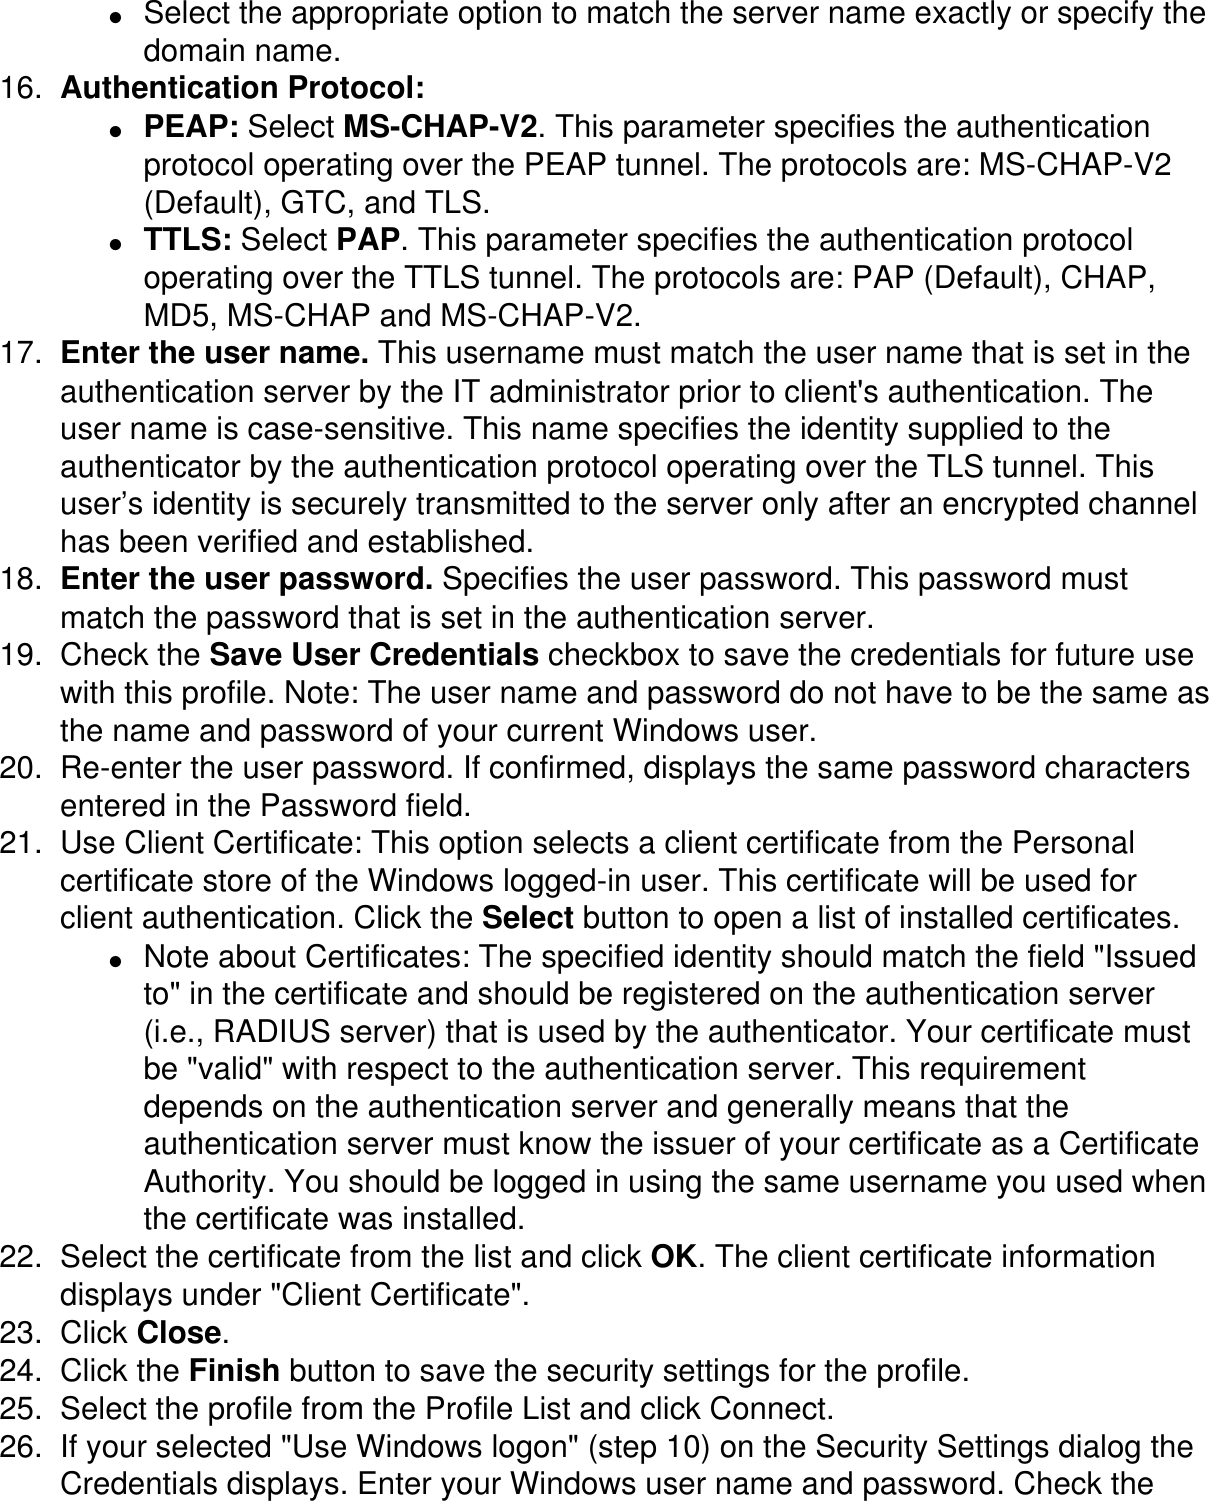 ●     Select the appropriate option to match the server name exactly or specify the domain name. 16.  Authentication Protocol: ●     PEAP: Select MS-CHAP-V2. This parameter specifies the authentication protocol operating over the PEAP tunnel. The protocols are: MS-CHAP-V2 (Default), GTC, and TLS. ●     TTLS: Select PAP. This parameter specifies the authentication protocol operating over the TTLS tunnel. The protocols are: PAP (Default), CHAP, MD5, MS-CHAP and MS-CHAP-V2.17.  Enter the user name. This username must match the user name that is set in the authentication server by the IT administrator prior to client&apos;s authentication. The user name is case-sensitive. This name specifies the identity supplied to the authenticator by the authentication protocol operating over the TLS tunnel. This user’s identity is securely transmitted to the server only after an encrypted channel has been verified and established. 18.  Enter the user password. Specifies the user password. This password must match the password that is set in the authentication server. 19.  Check the Save User Credentials checkbox to save the credentials for future use with this profile. Note: The user name and password do not have to be the same as the name and password of your current Windows user.20.  Re-enter the user password. If confirmed, displays the same password characters entered in the Password field. 21.  Use Client Certificate: This option selects a client certificate from the Personal certificate store of the Windows logged-in user. This certificate will be used for client authentication. Click the Select button to open a list of installed certificates. ●     Note about Certificates: The specified identity should match the field &quot;Issued to&quot; in the certificate and should be registered on the authentication server (i.e., RADIUS server) that is used by the authenticator. Your certificate must be &quot;valid&quot; with respect to the authentication server. This requirement depends on the authentication server and generally means that the authentication server must know the issuer of your certificate as a Certificate Authority. You should be logged in using the same username you used when the certificate was installed. 22.  Select the certificate from the list and click OK. The client certificate information displays under &quot;Client Certificate&quot;. 23.  Click Close. 24.  Click the Finish button to save the security settings for the profile.25.  Select the profile from the Profile List and click Connect.26.  If your selected &quot;Use Windows logon&quot; (step 10) on the Security Settings dialog the Credentials displays. Enter your Windows user name and password. Check the 